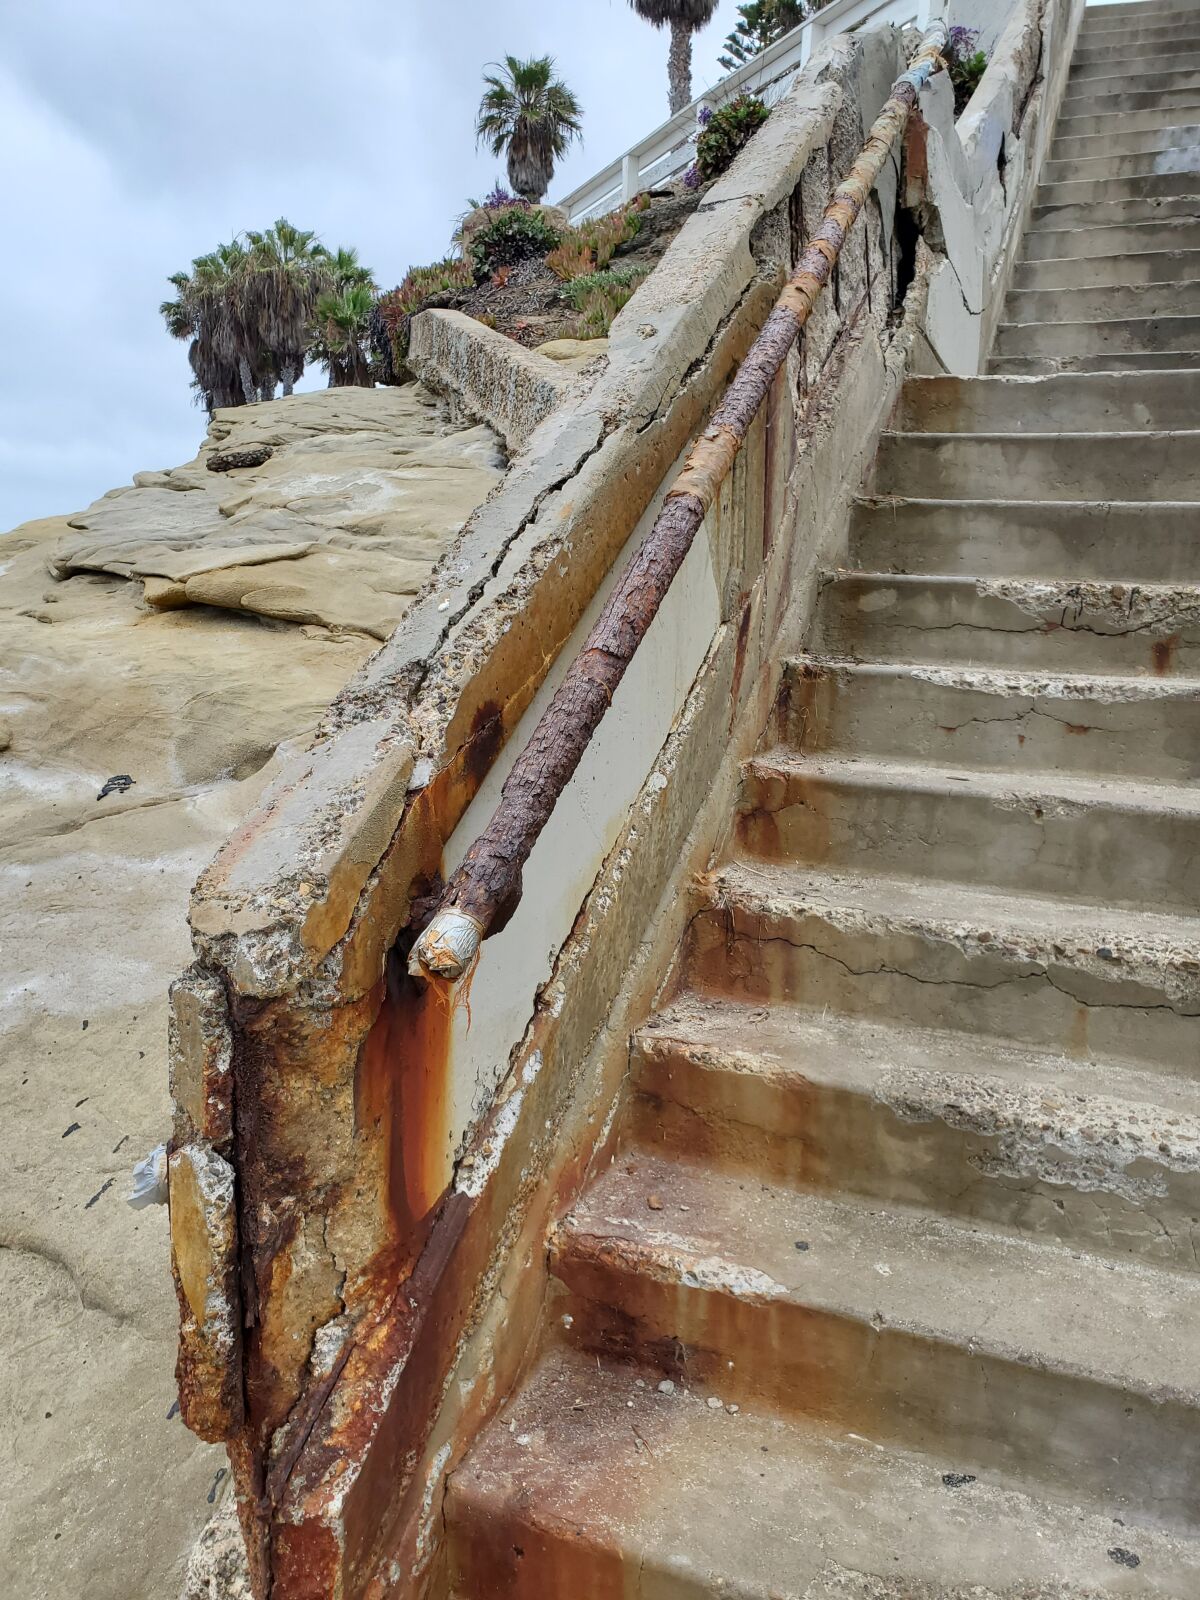 Rusted rebar and crumbling concrete plague the oceanside stairway from Camino de la Costa in La Jolla.